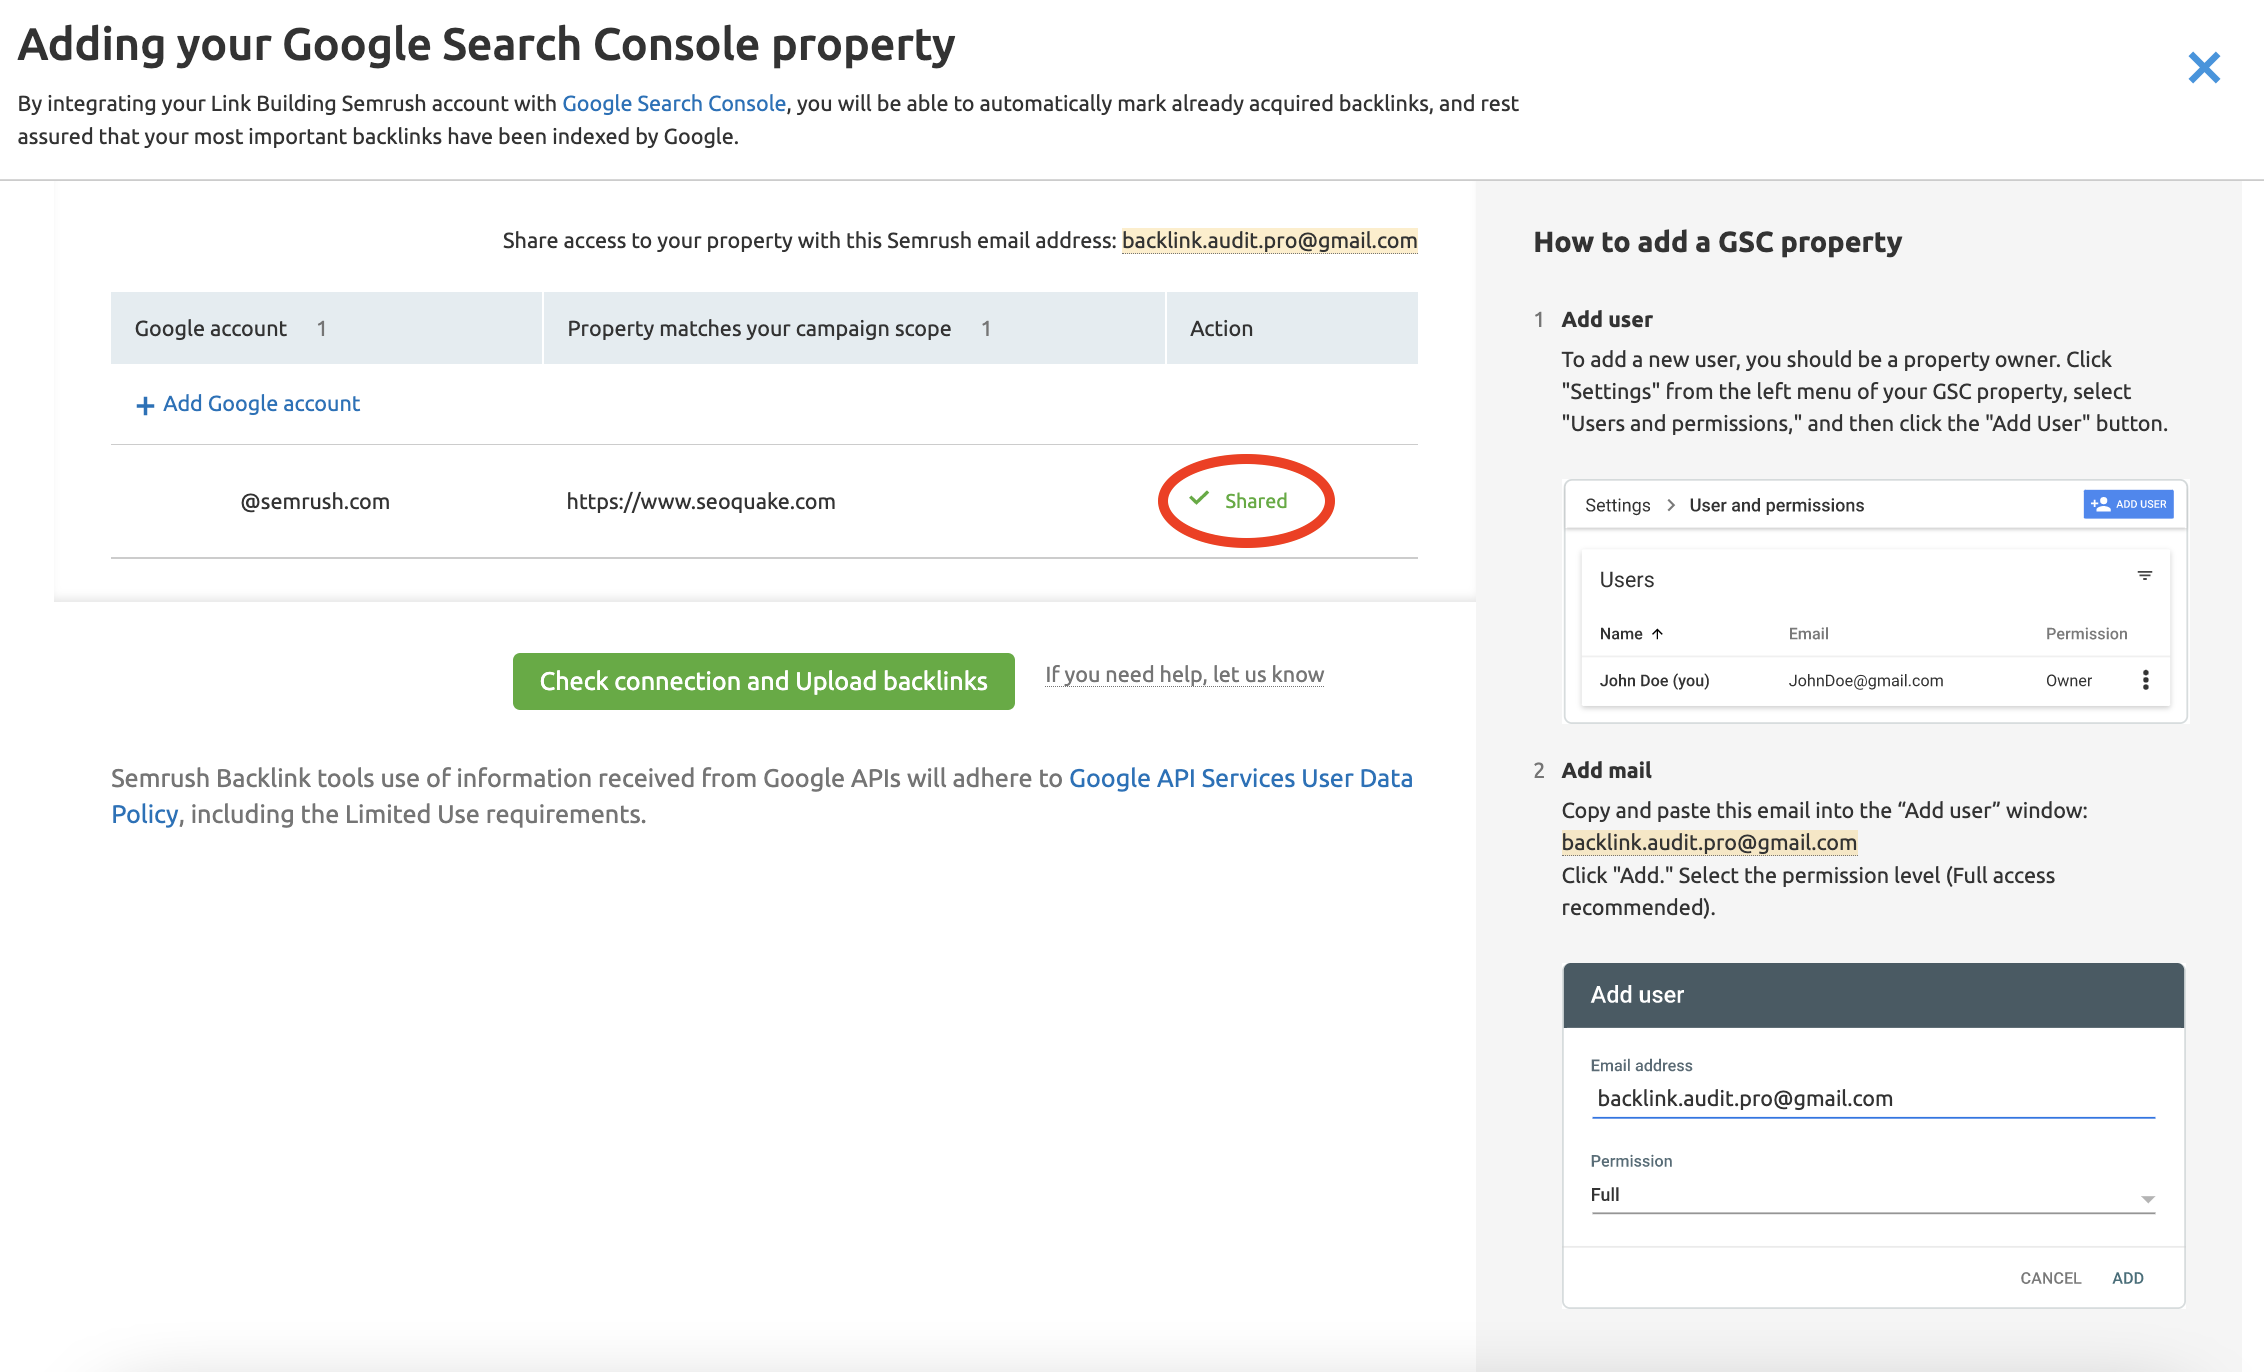 Connecting Link Building Tool with Google Search Console image 3